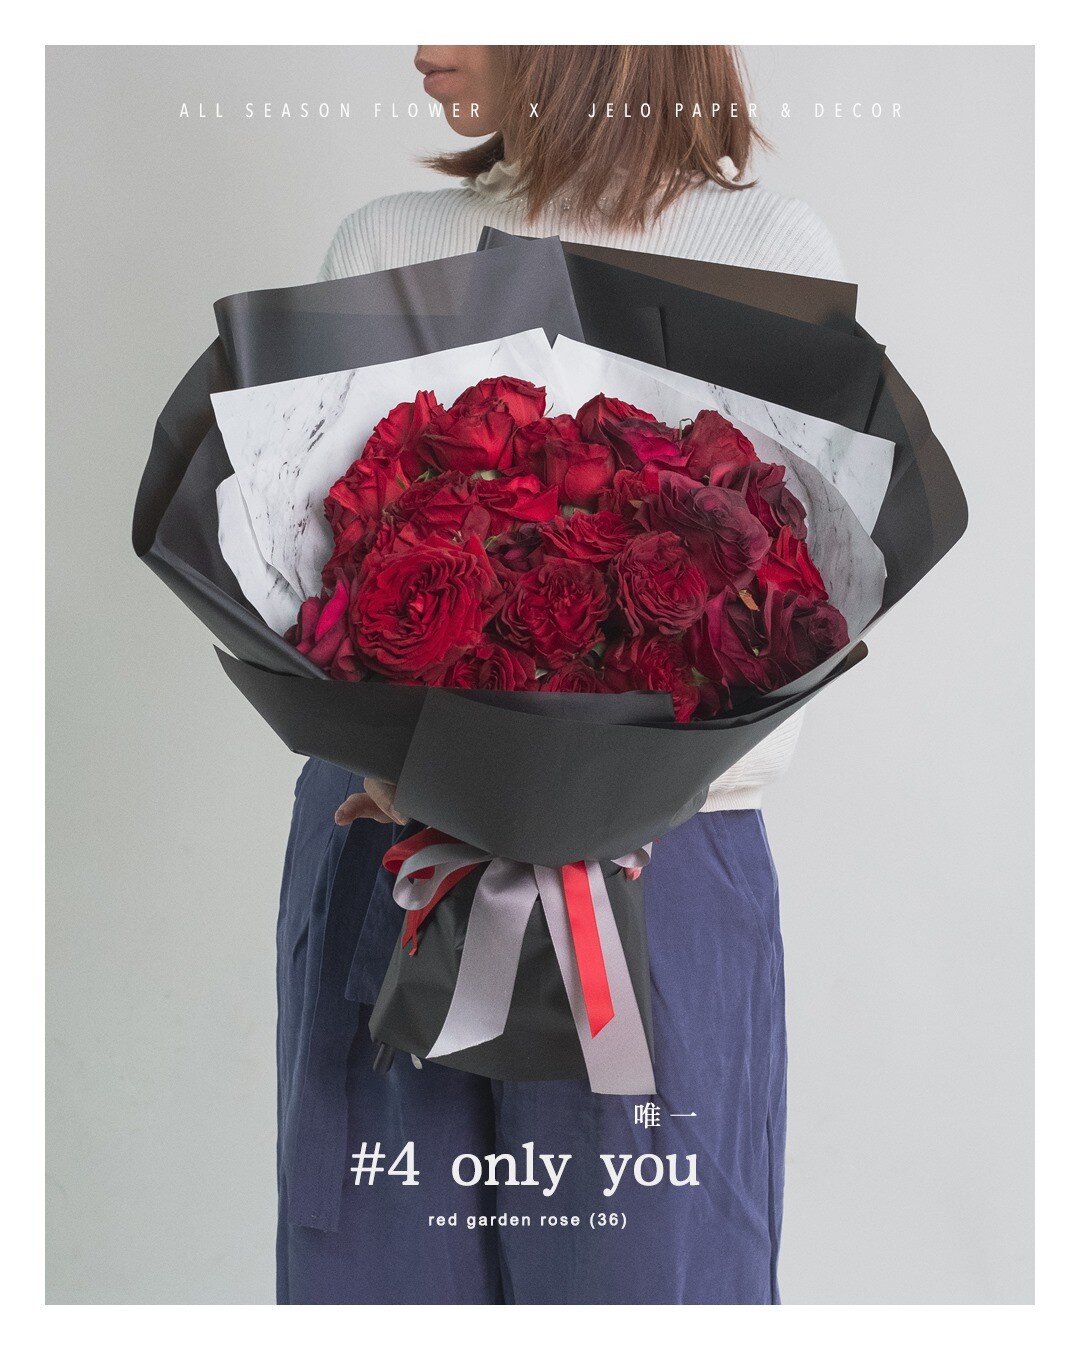 🌷 Valentine's flowers collection

#4 Only You 
唯一

15% off (1/4 - 1/25)

Free! Lyrics message card

How to order : 
Message us or Online order : 
www.allseasonflower.com/vday21

$12 Delivery flat rate to 5 boroughs
Free pick up in Brooklyn location
